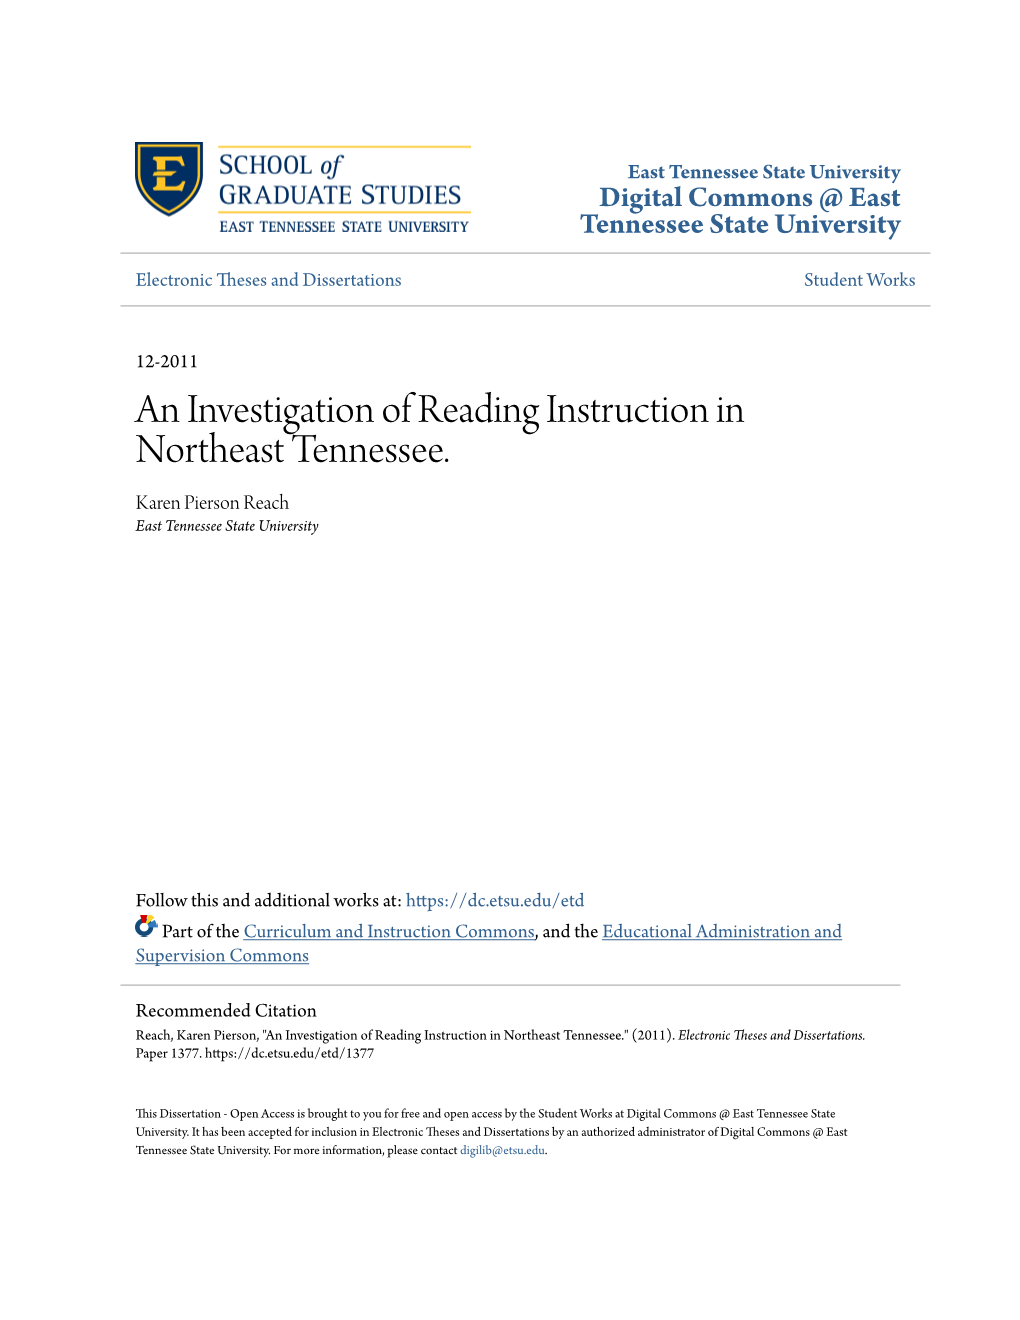 An Investigation of Reading Instruction in Northeast Tennessee. Karen Pierson Reach East Tennessee State University